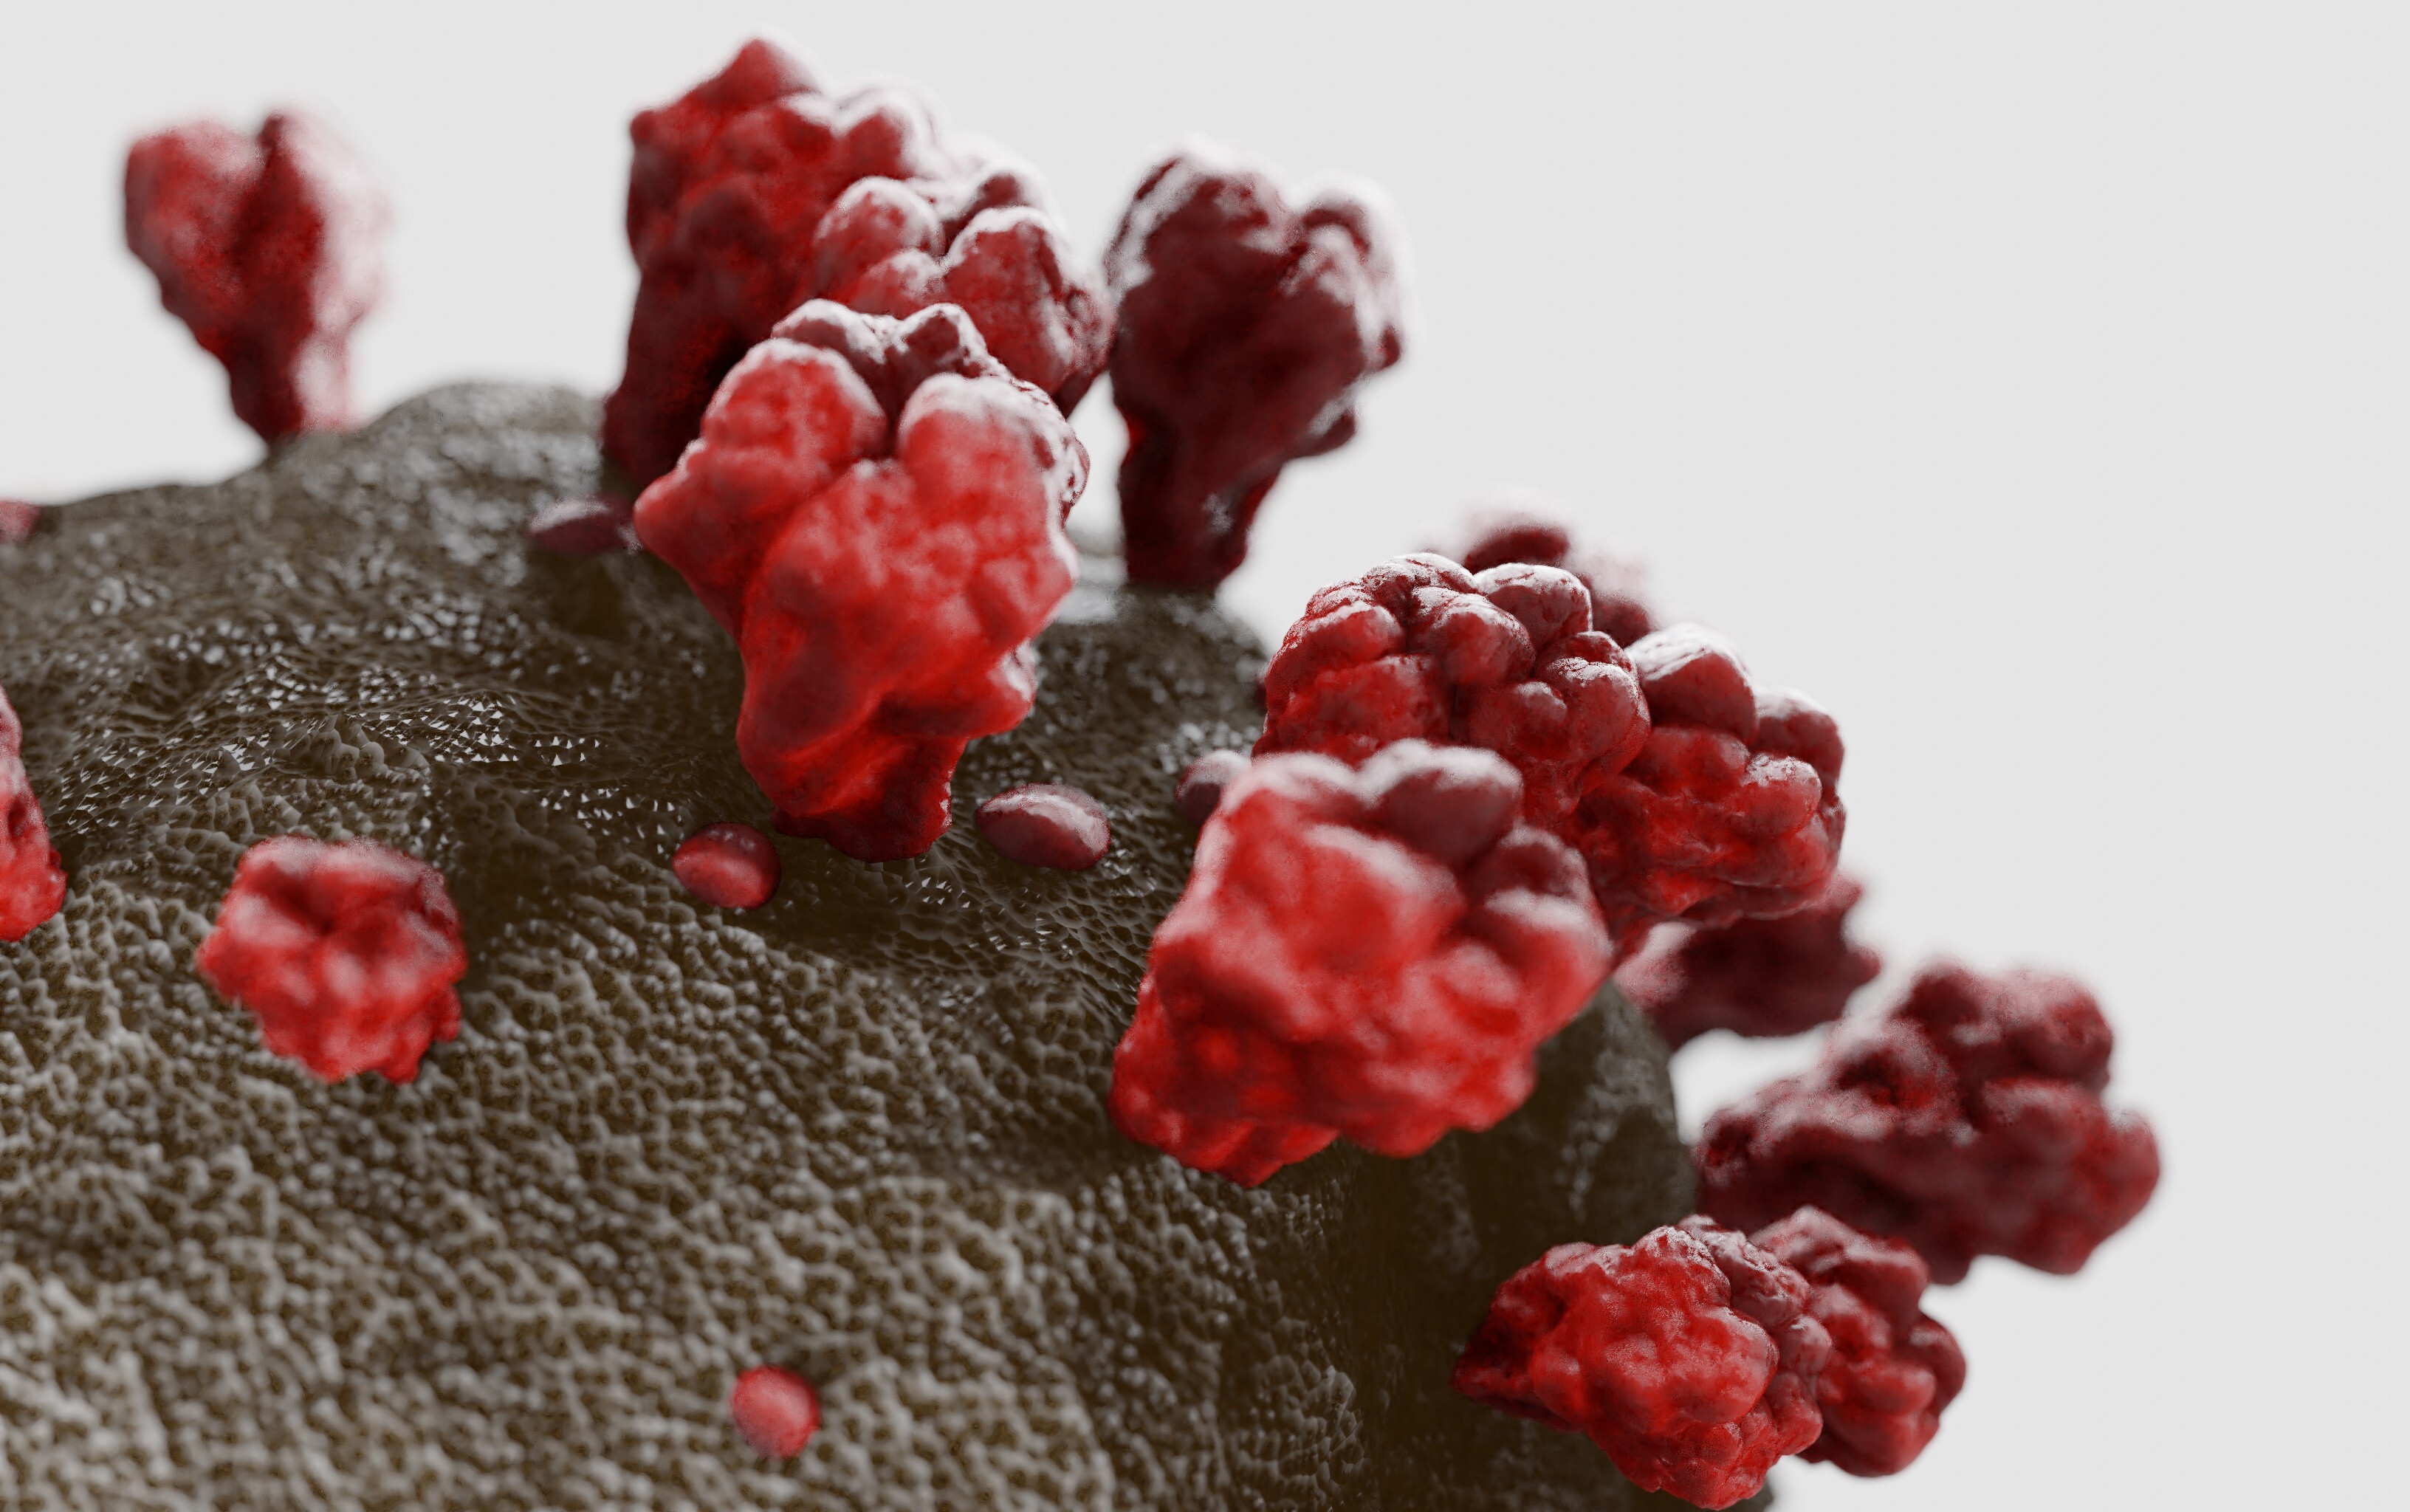 An artist’s 3D rendering of the coronavirus. Photo: Getty Images